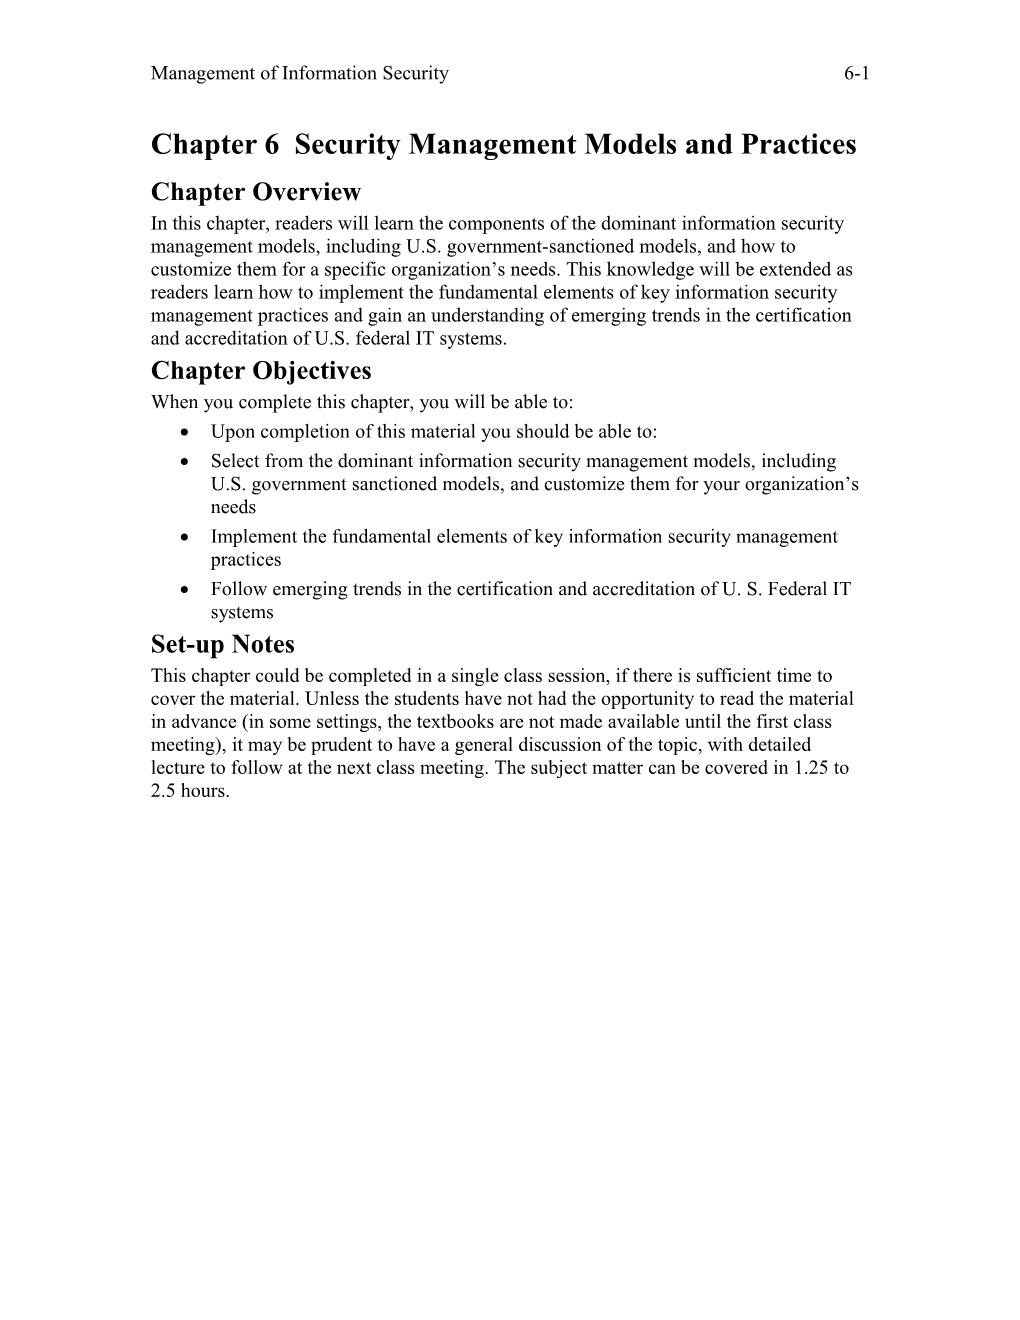 Chapter 6 Security Management Models and Practices